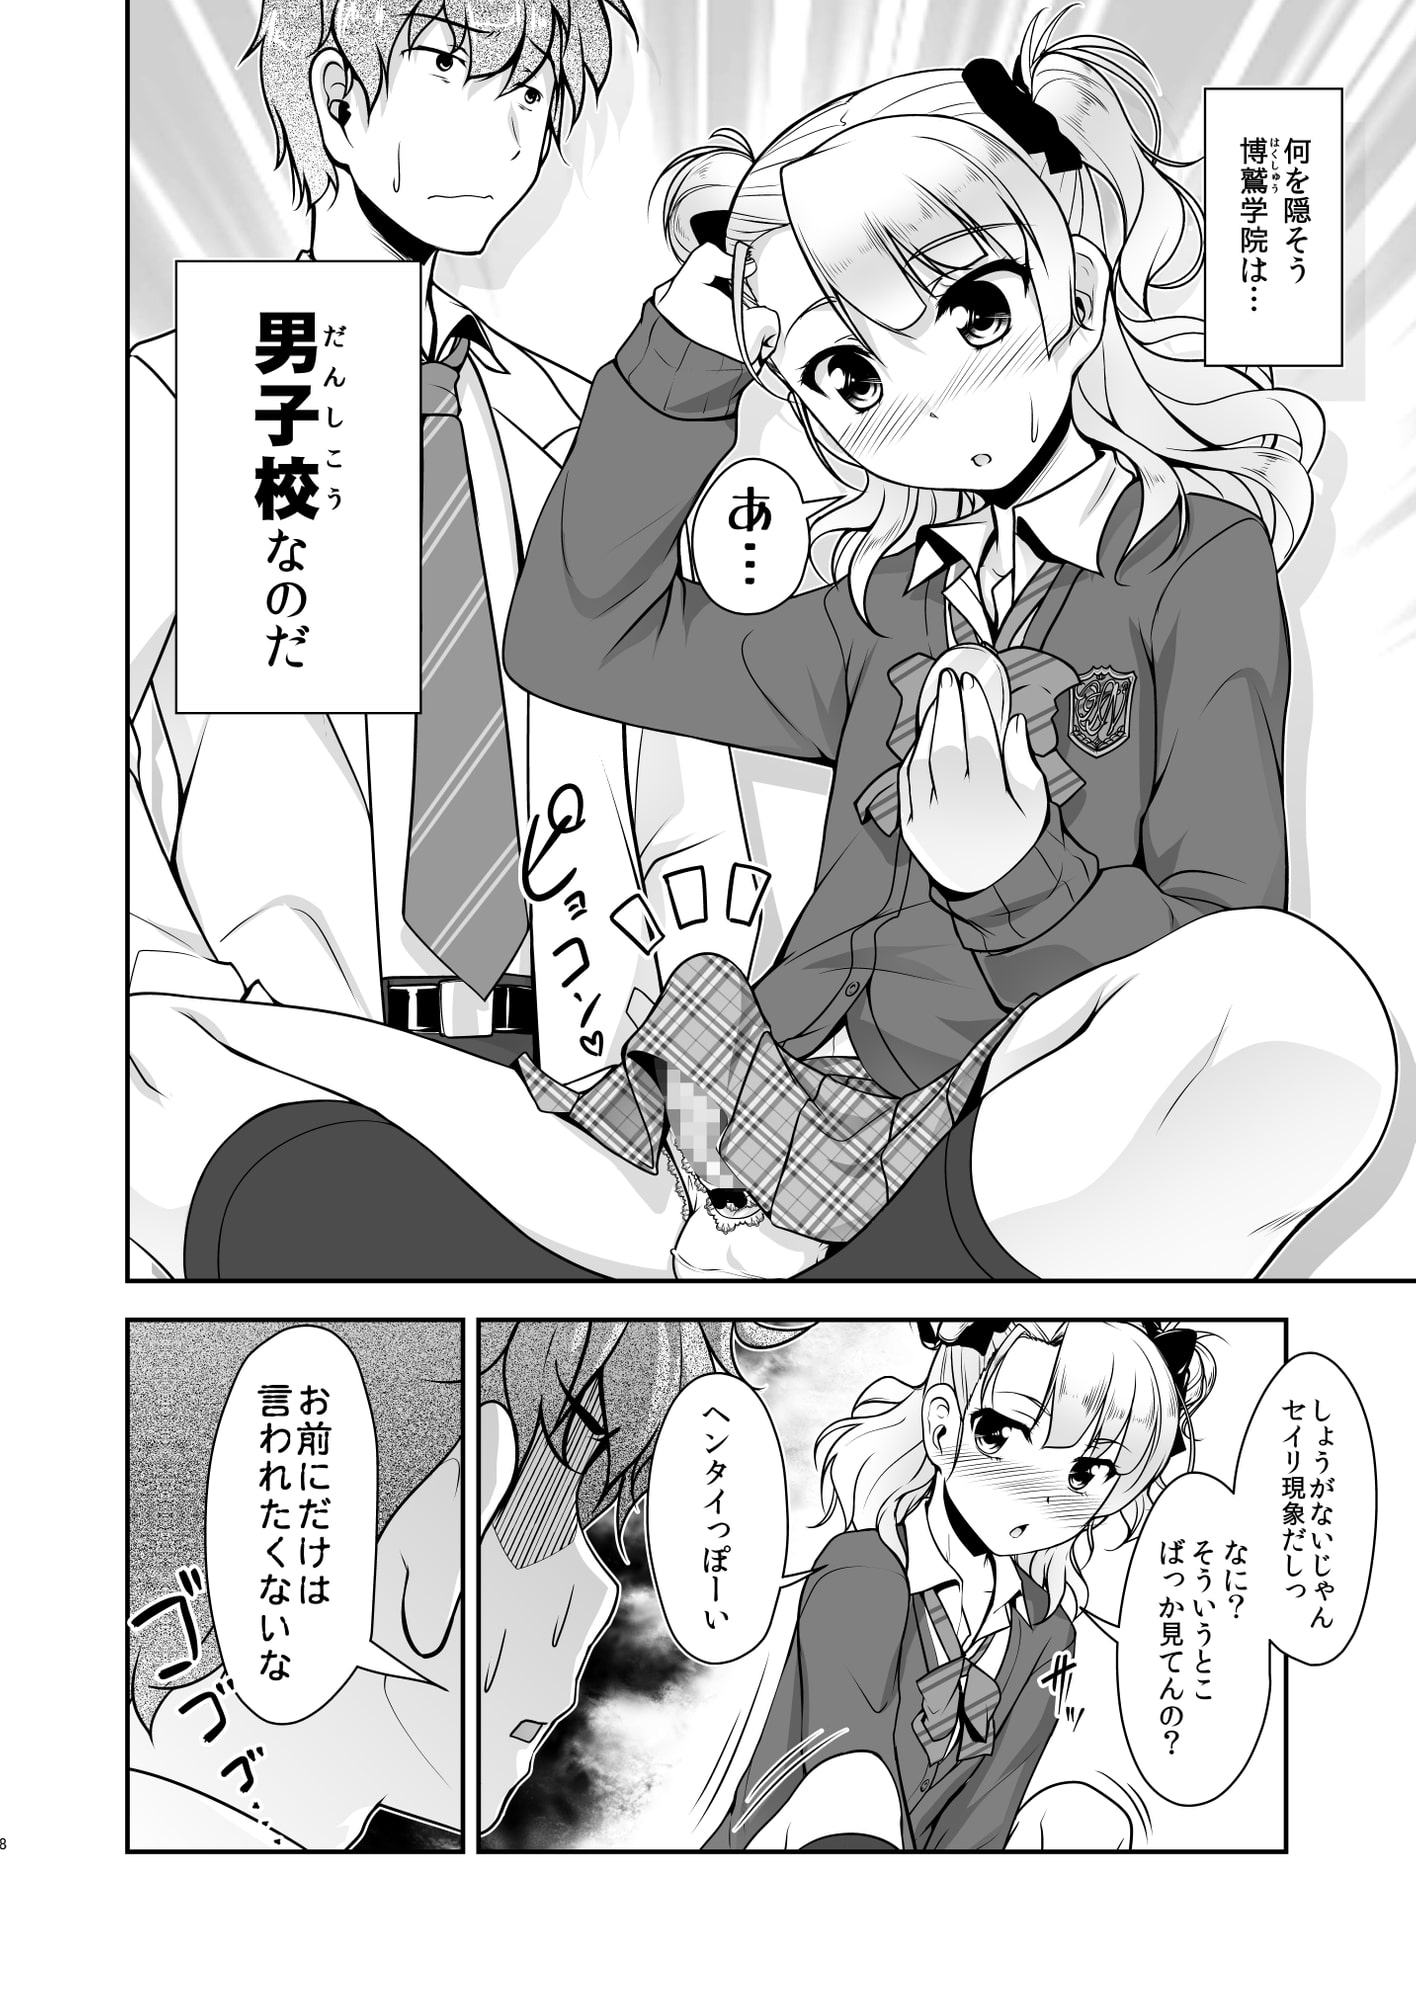 JK-san in The Infirmary #1